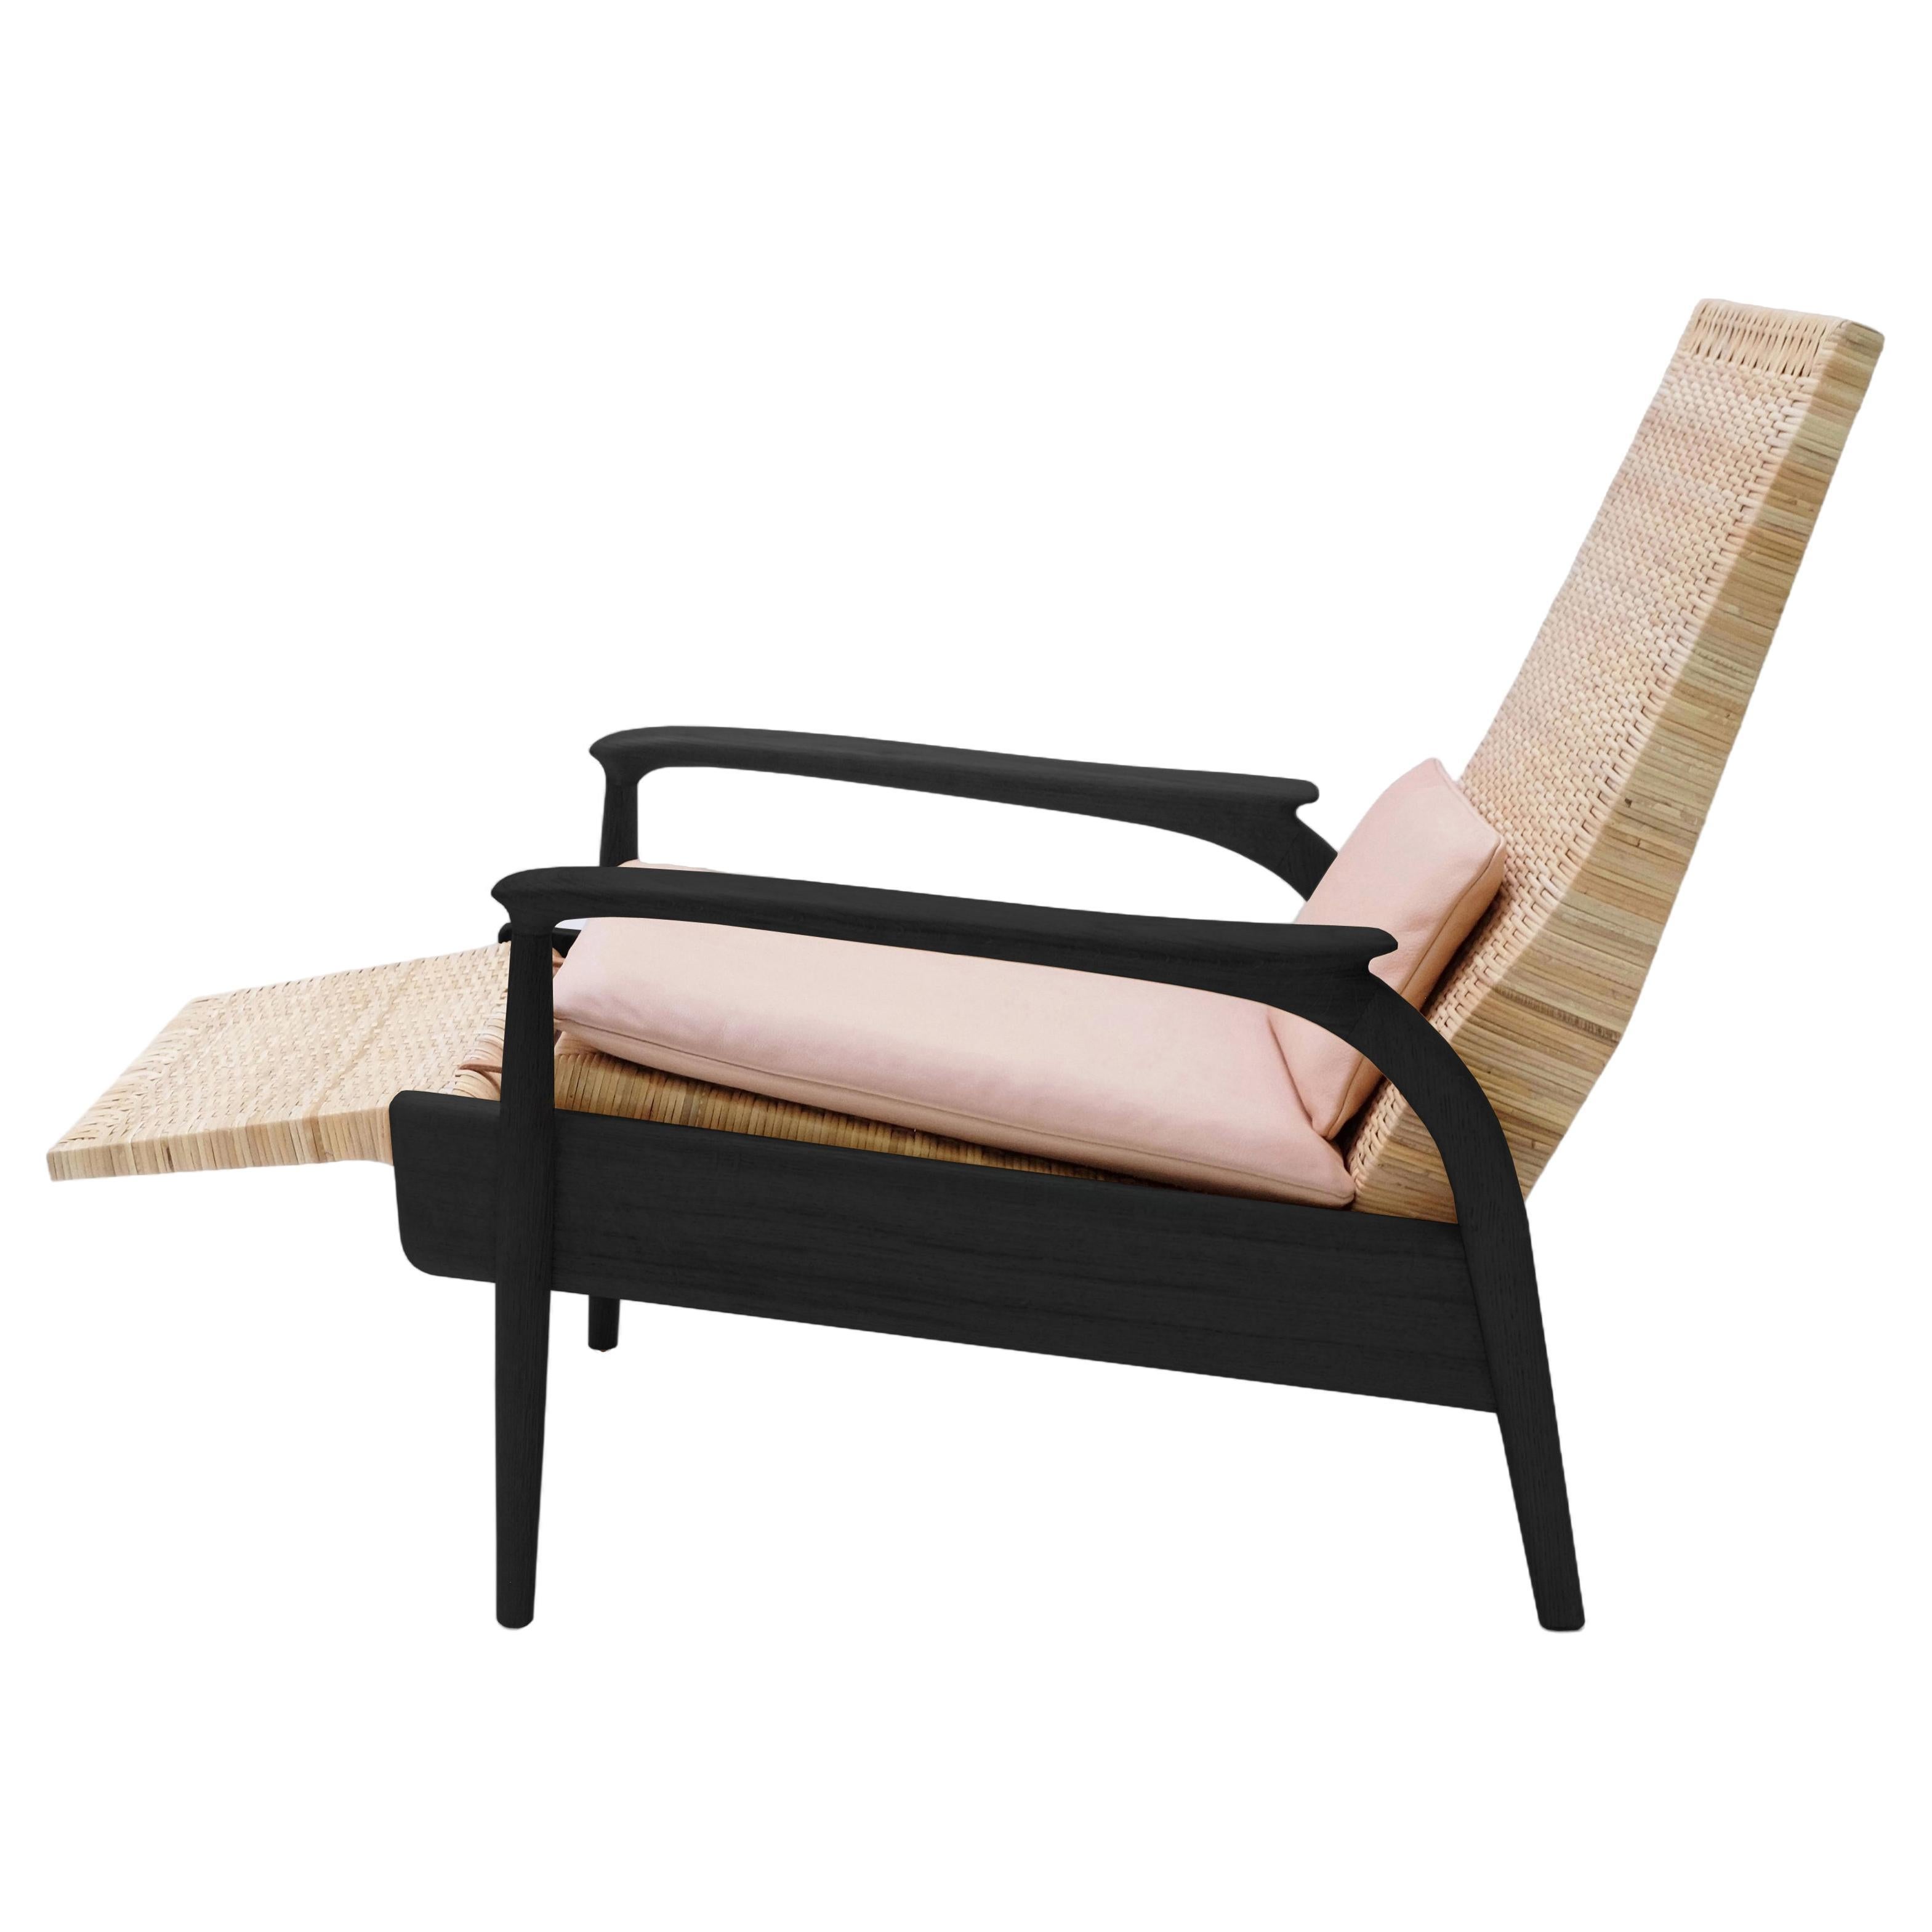 Custom-made Lounge Chair, natural blackended Oak, Natural Cane, Leather Cushions